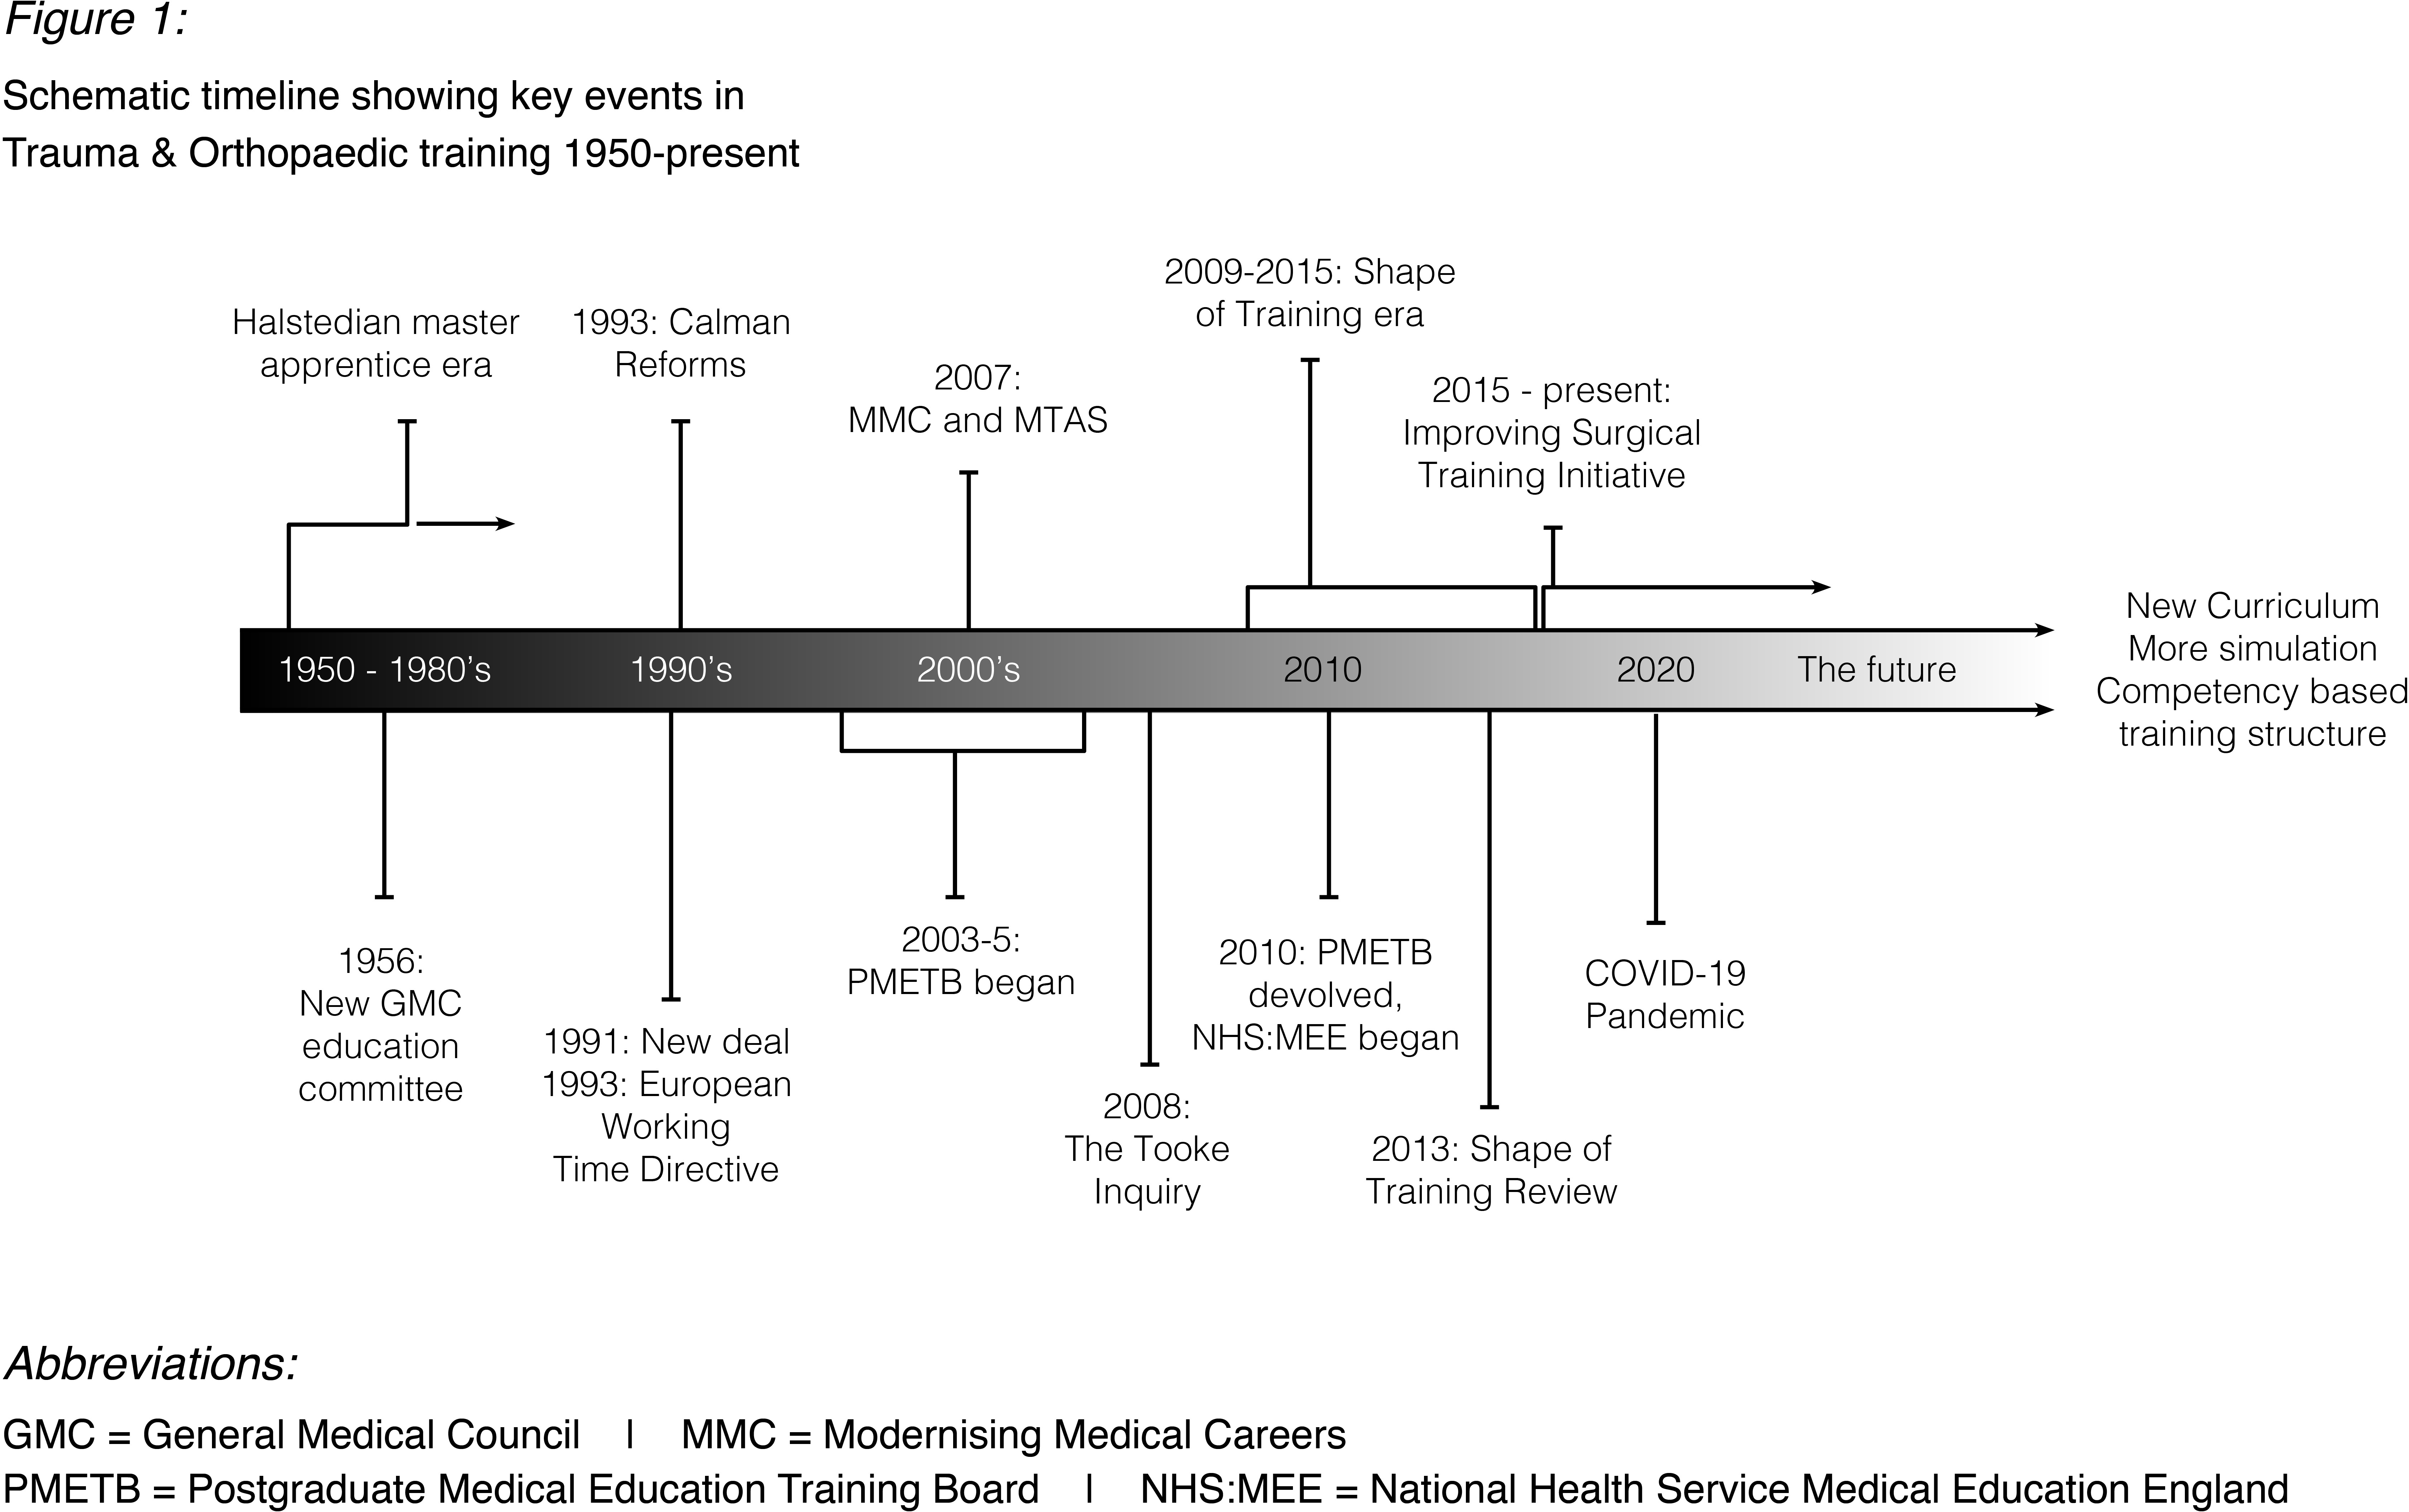 Fig. 1 
          Schematic timeline showing key events in Trauma & Orthopaedic training, 1950-present
        